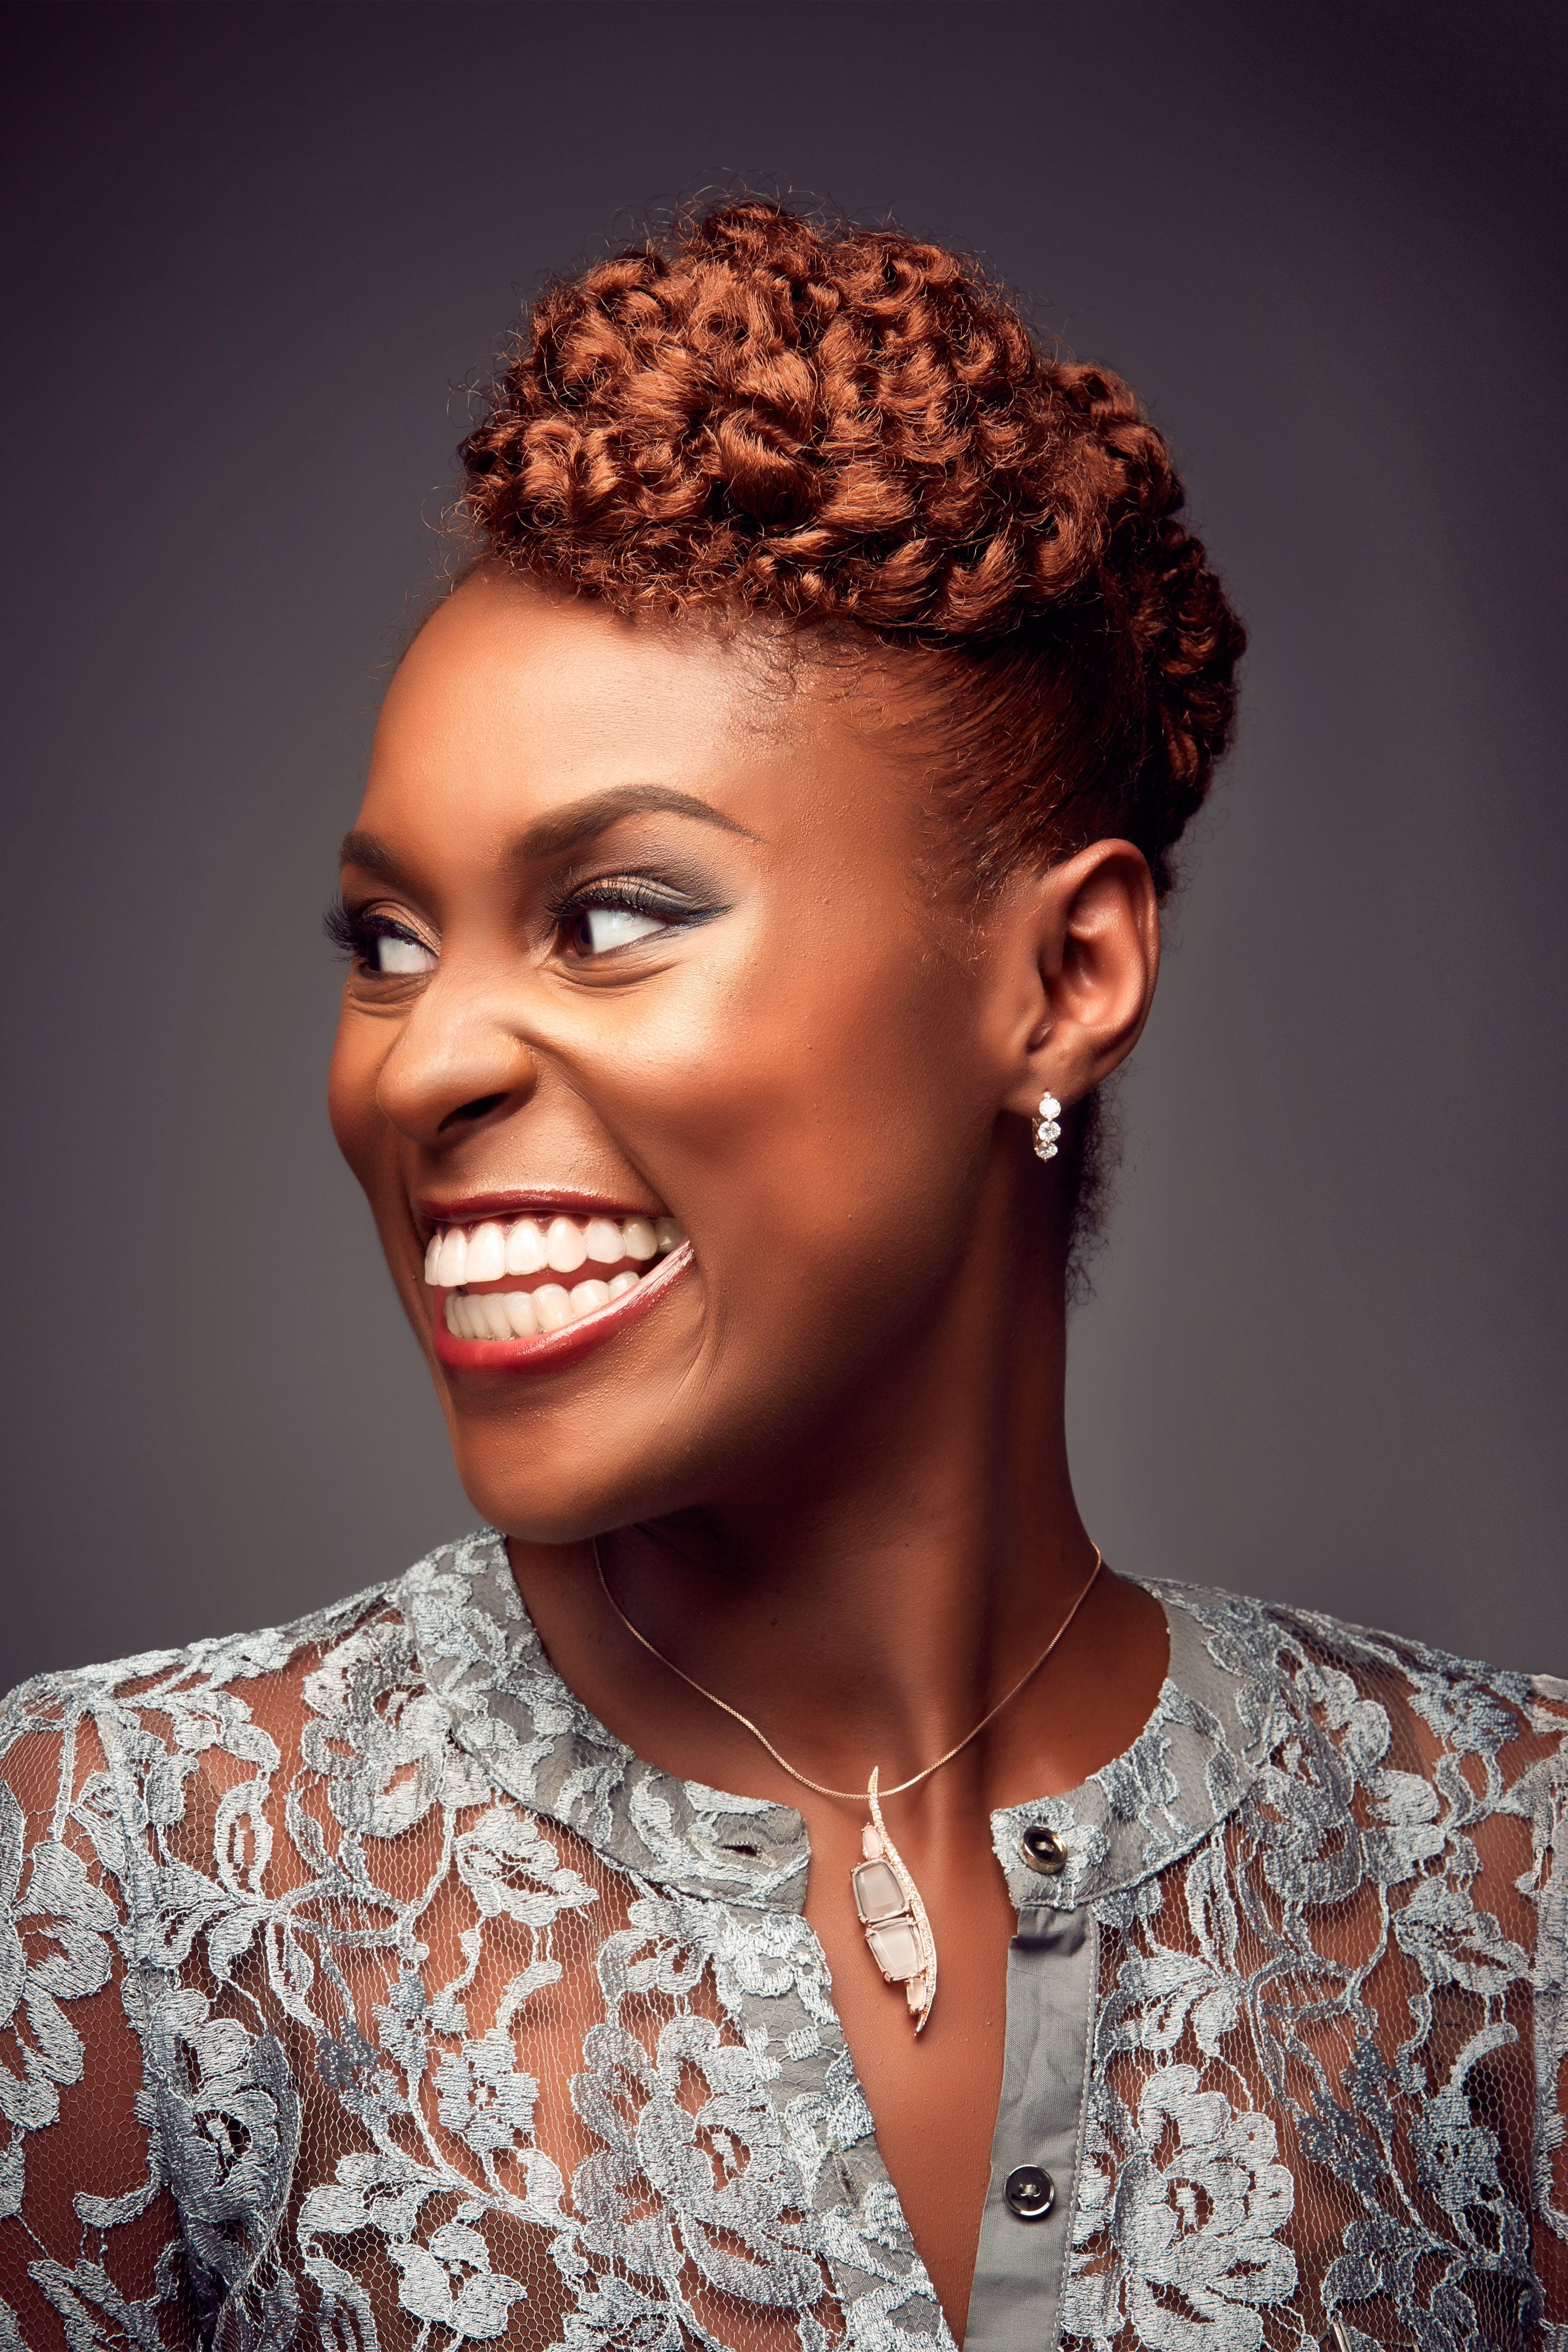 'A SIP:' Issa Rae Gets The Tea From All Her Hollywood Friends In This New YouTube Series
